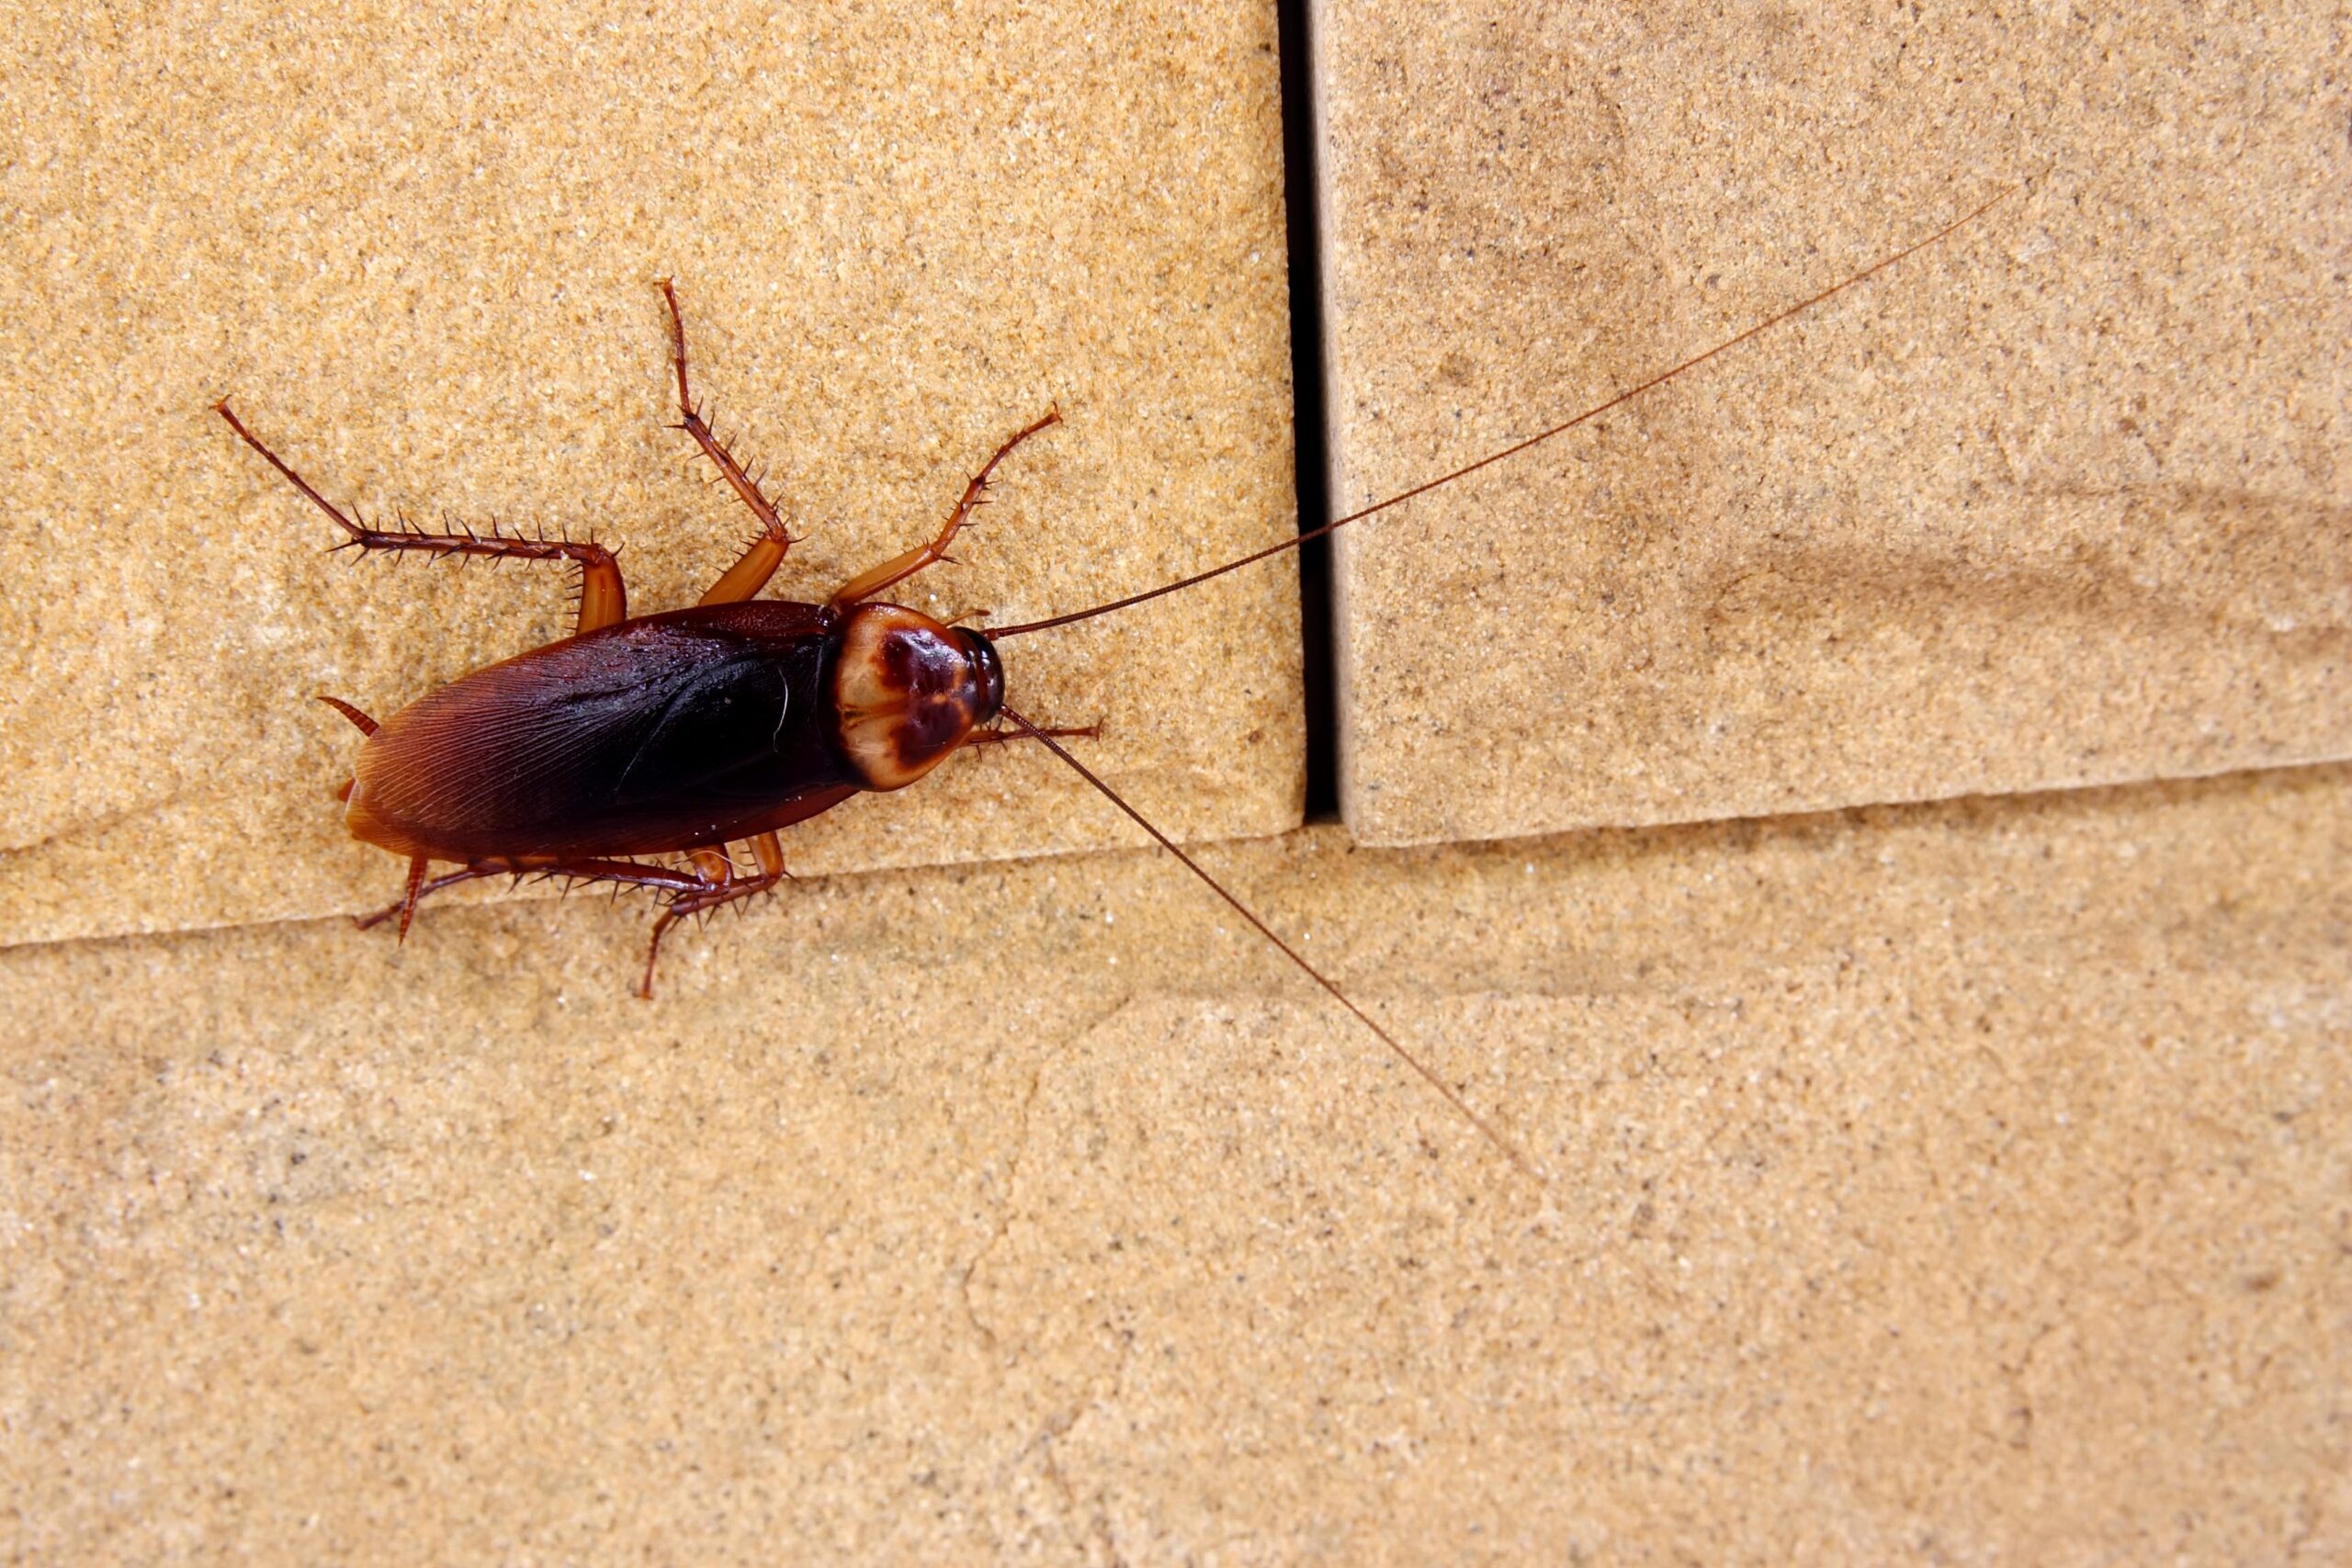 https://www.bobvila.com/wp-content/uploads/2021/07/What-Attracts-Cockroaches-scaled.jpg